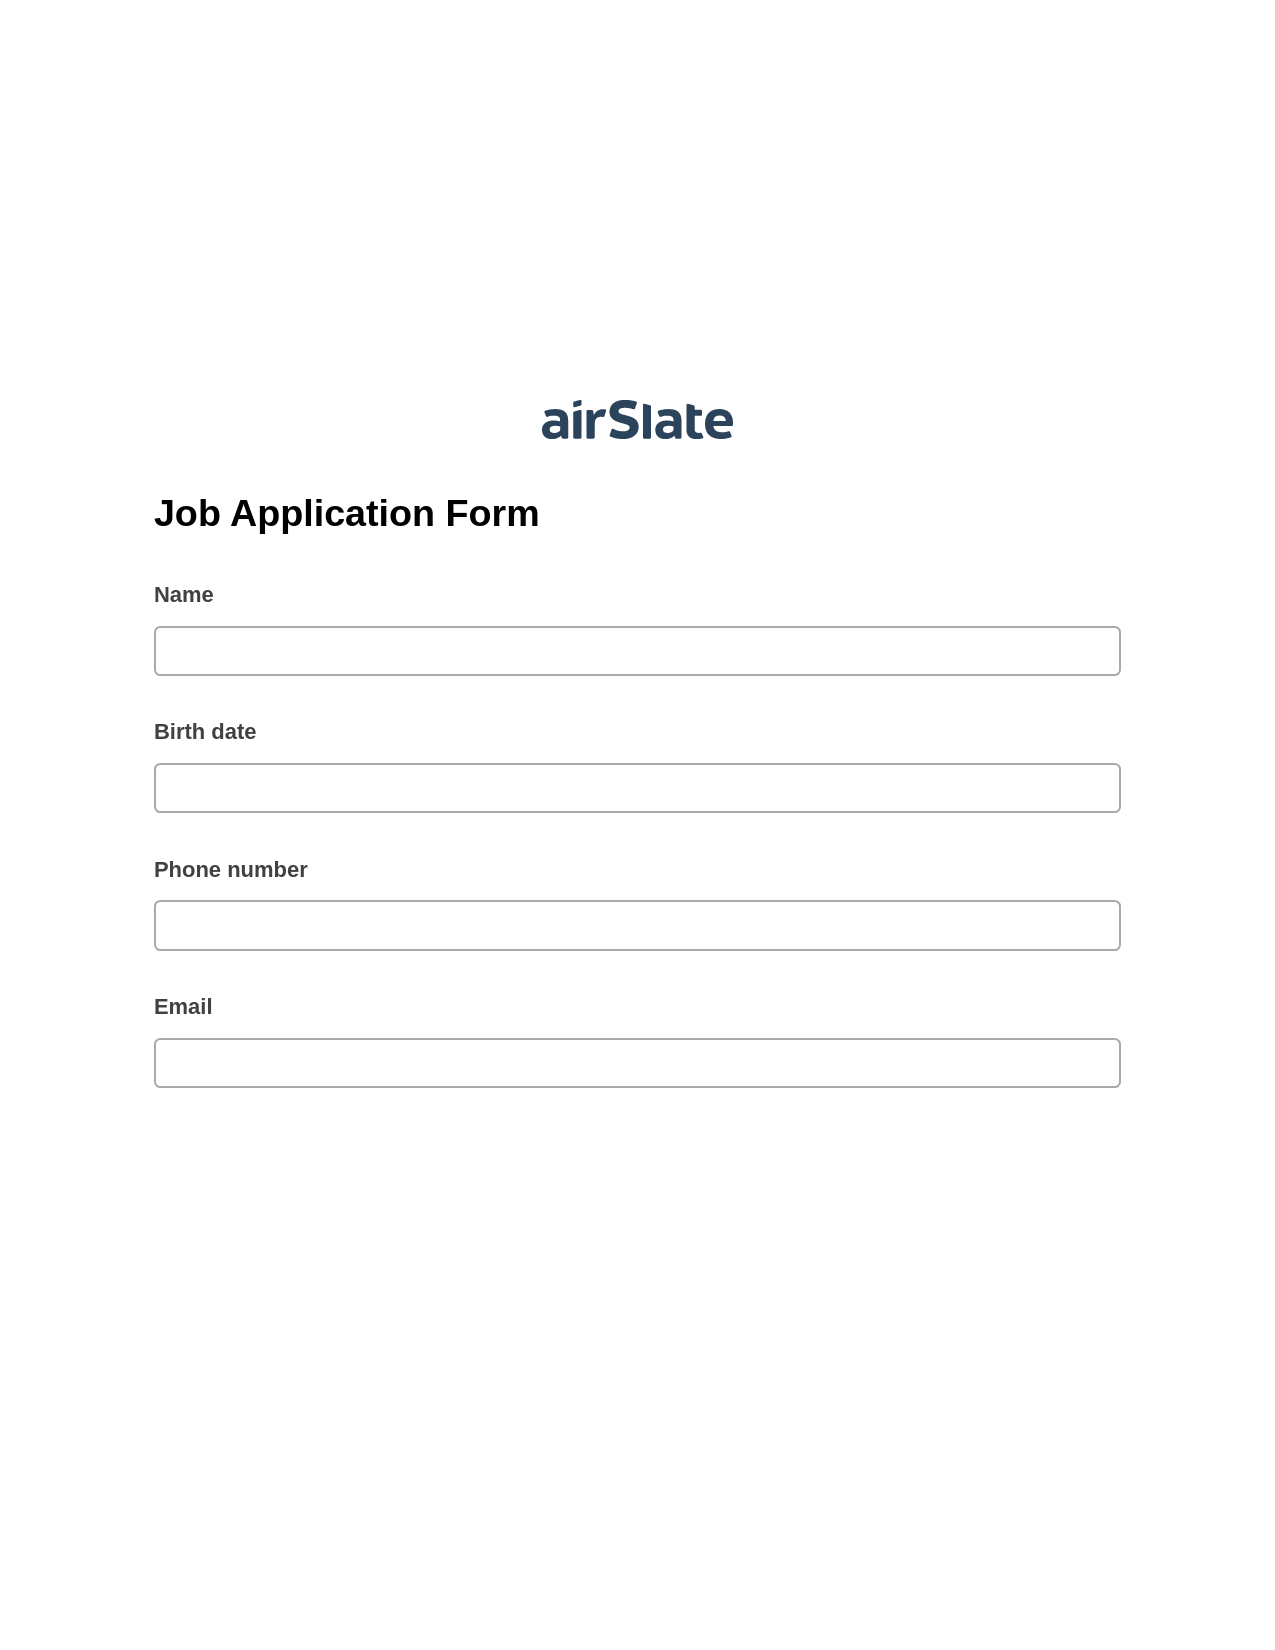 Multirole Job Application Form Pre-fill Dropdown from Airtable, SendGrid send Campaign bot, Export to Salesforce Bot